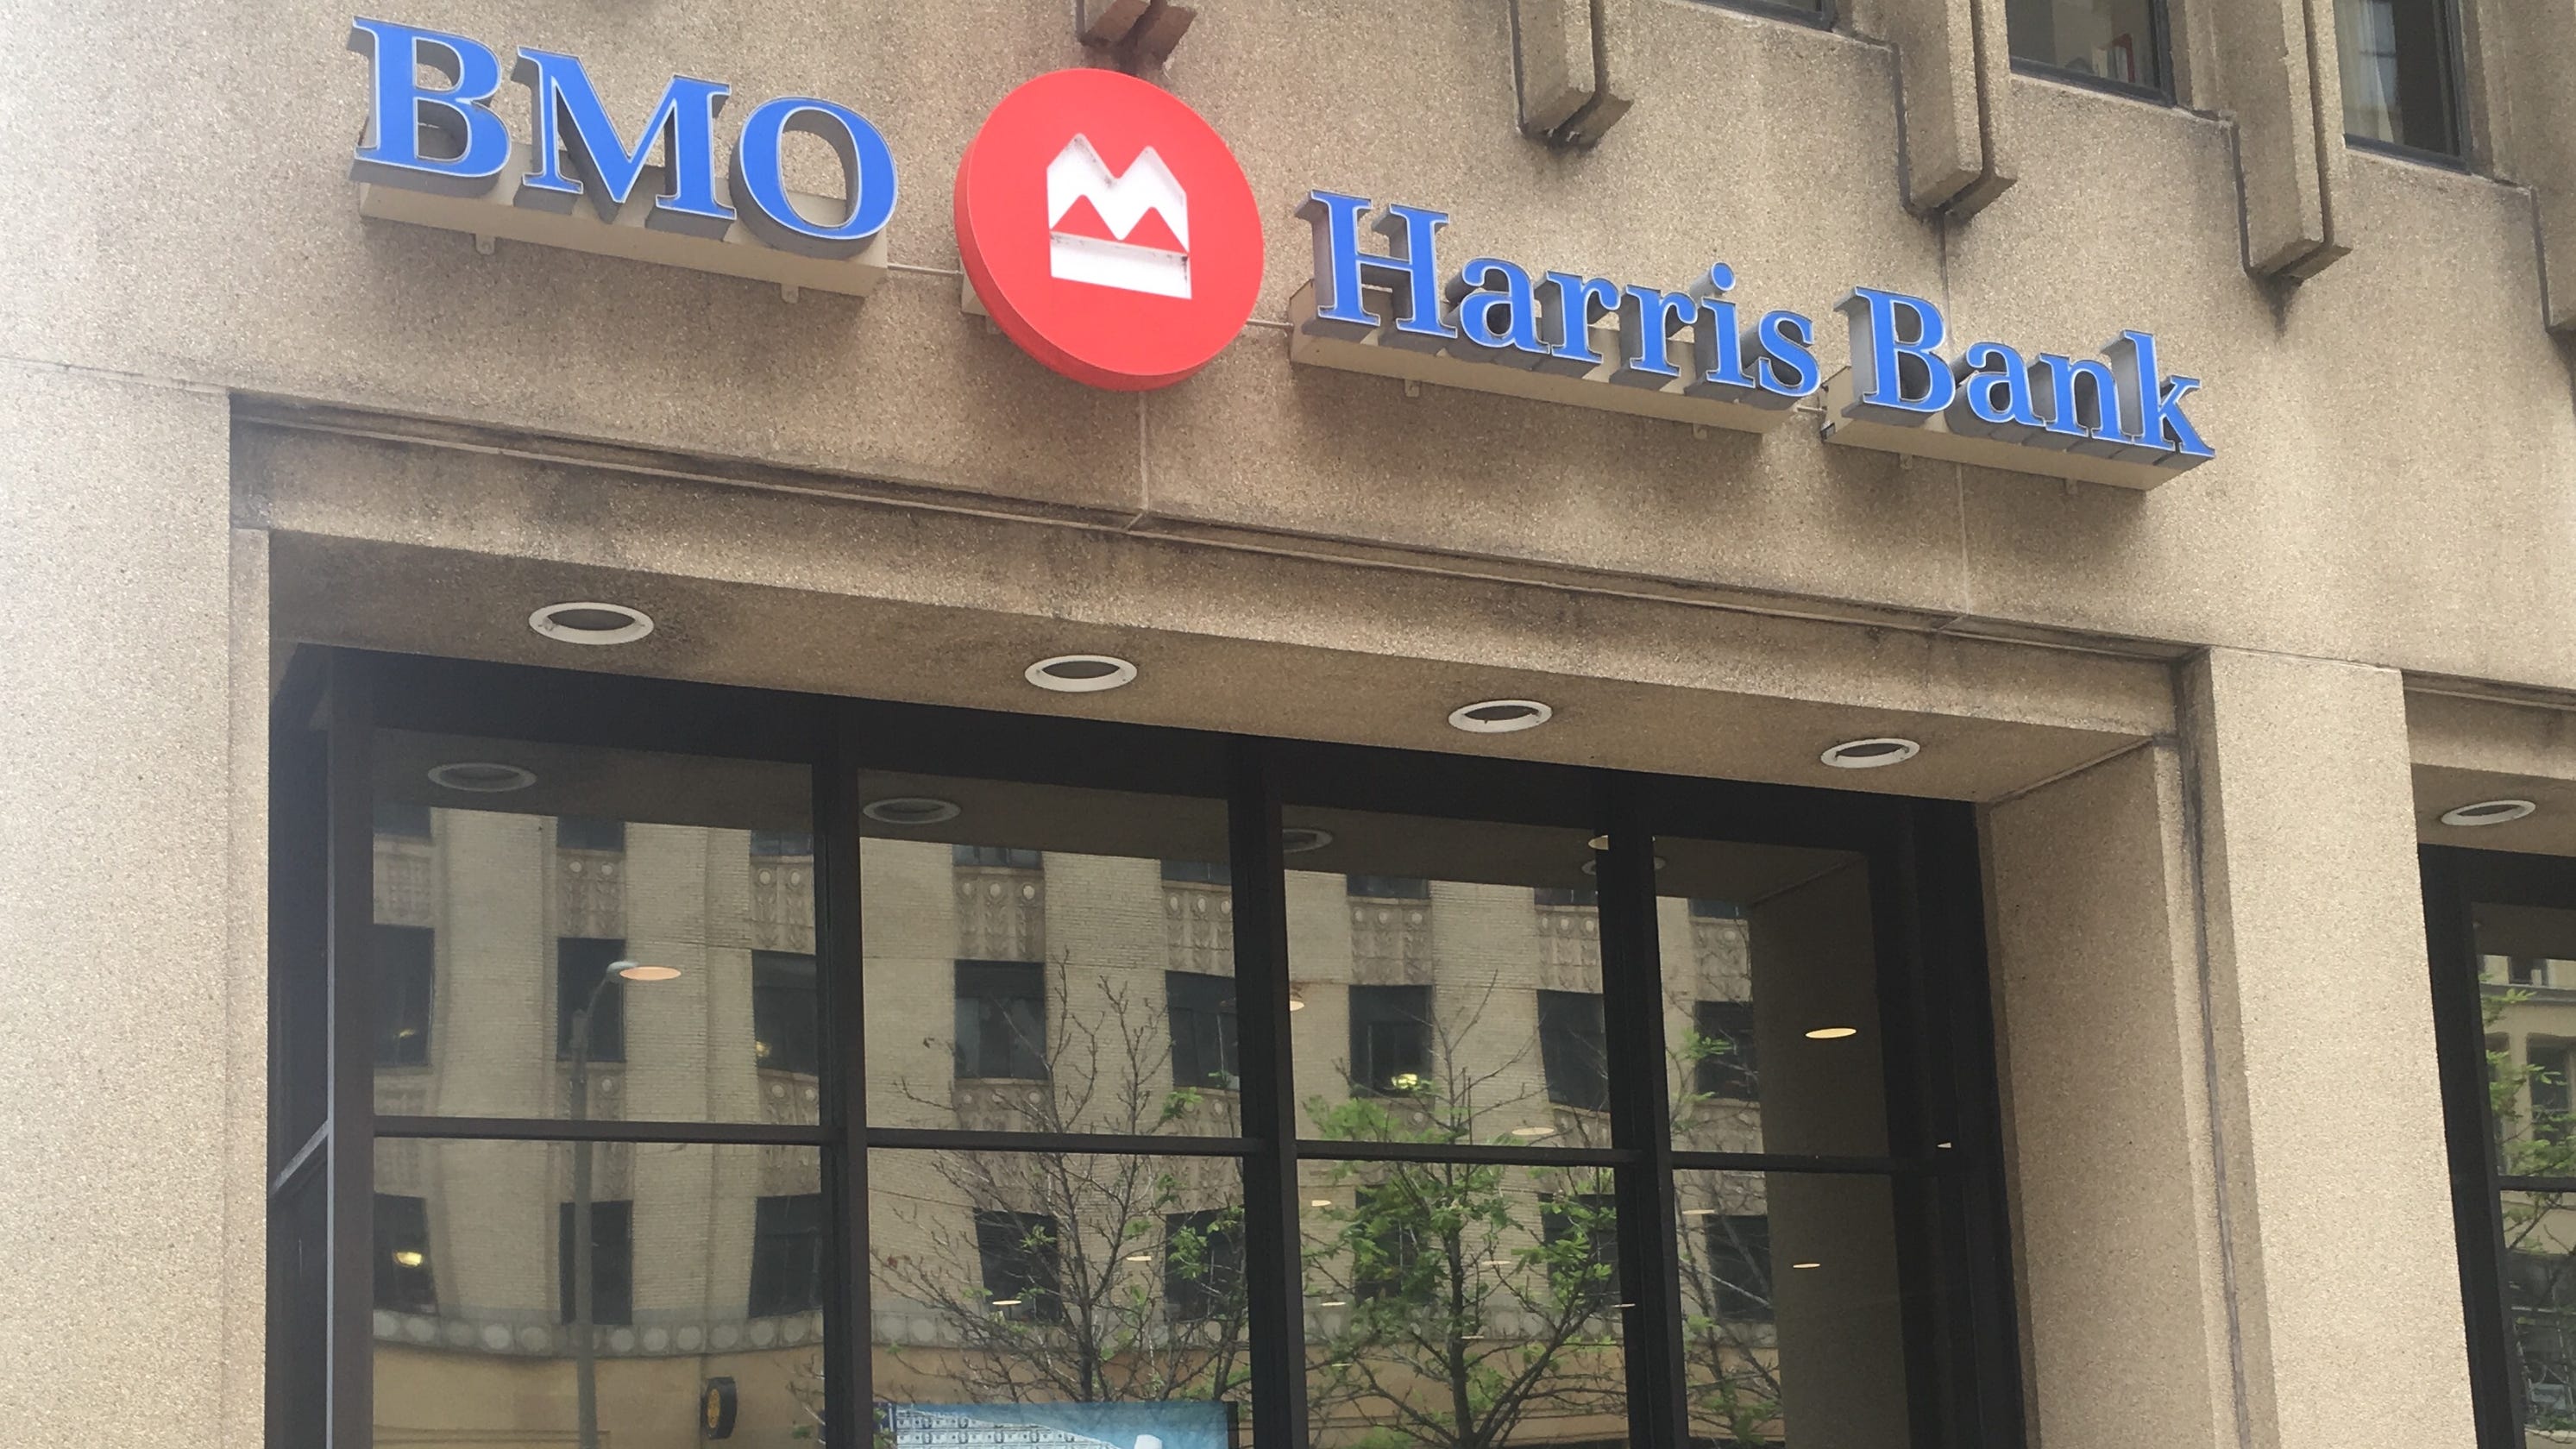 Bmo Harris Cuts Face To Face Mortgage Lenders As Banking Changes